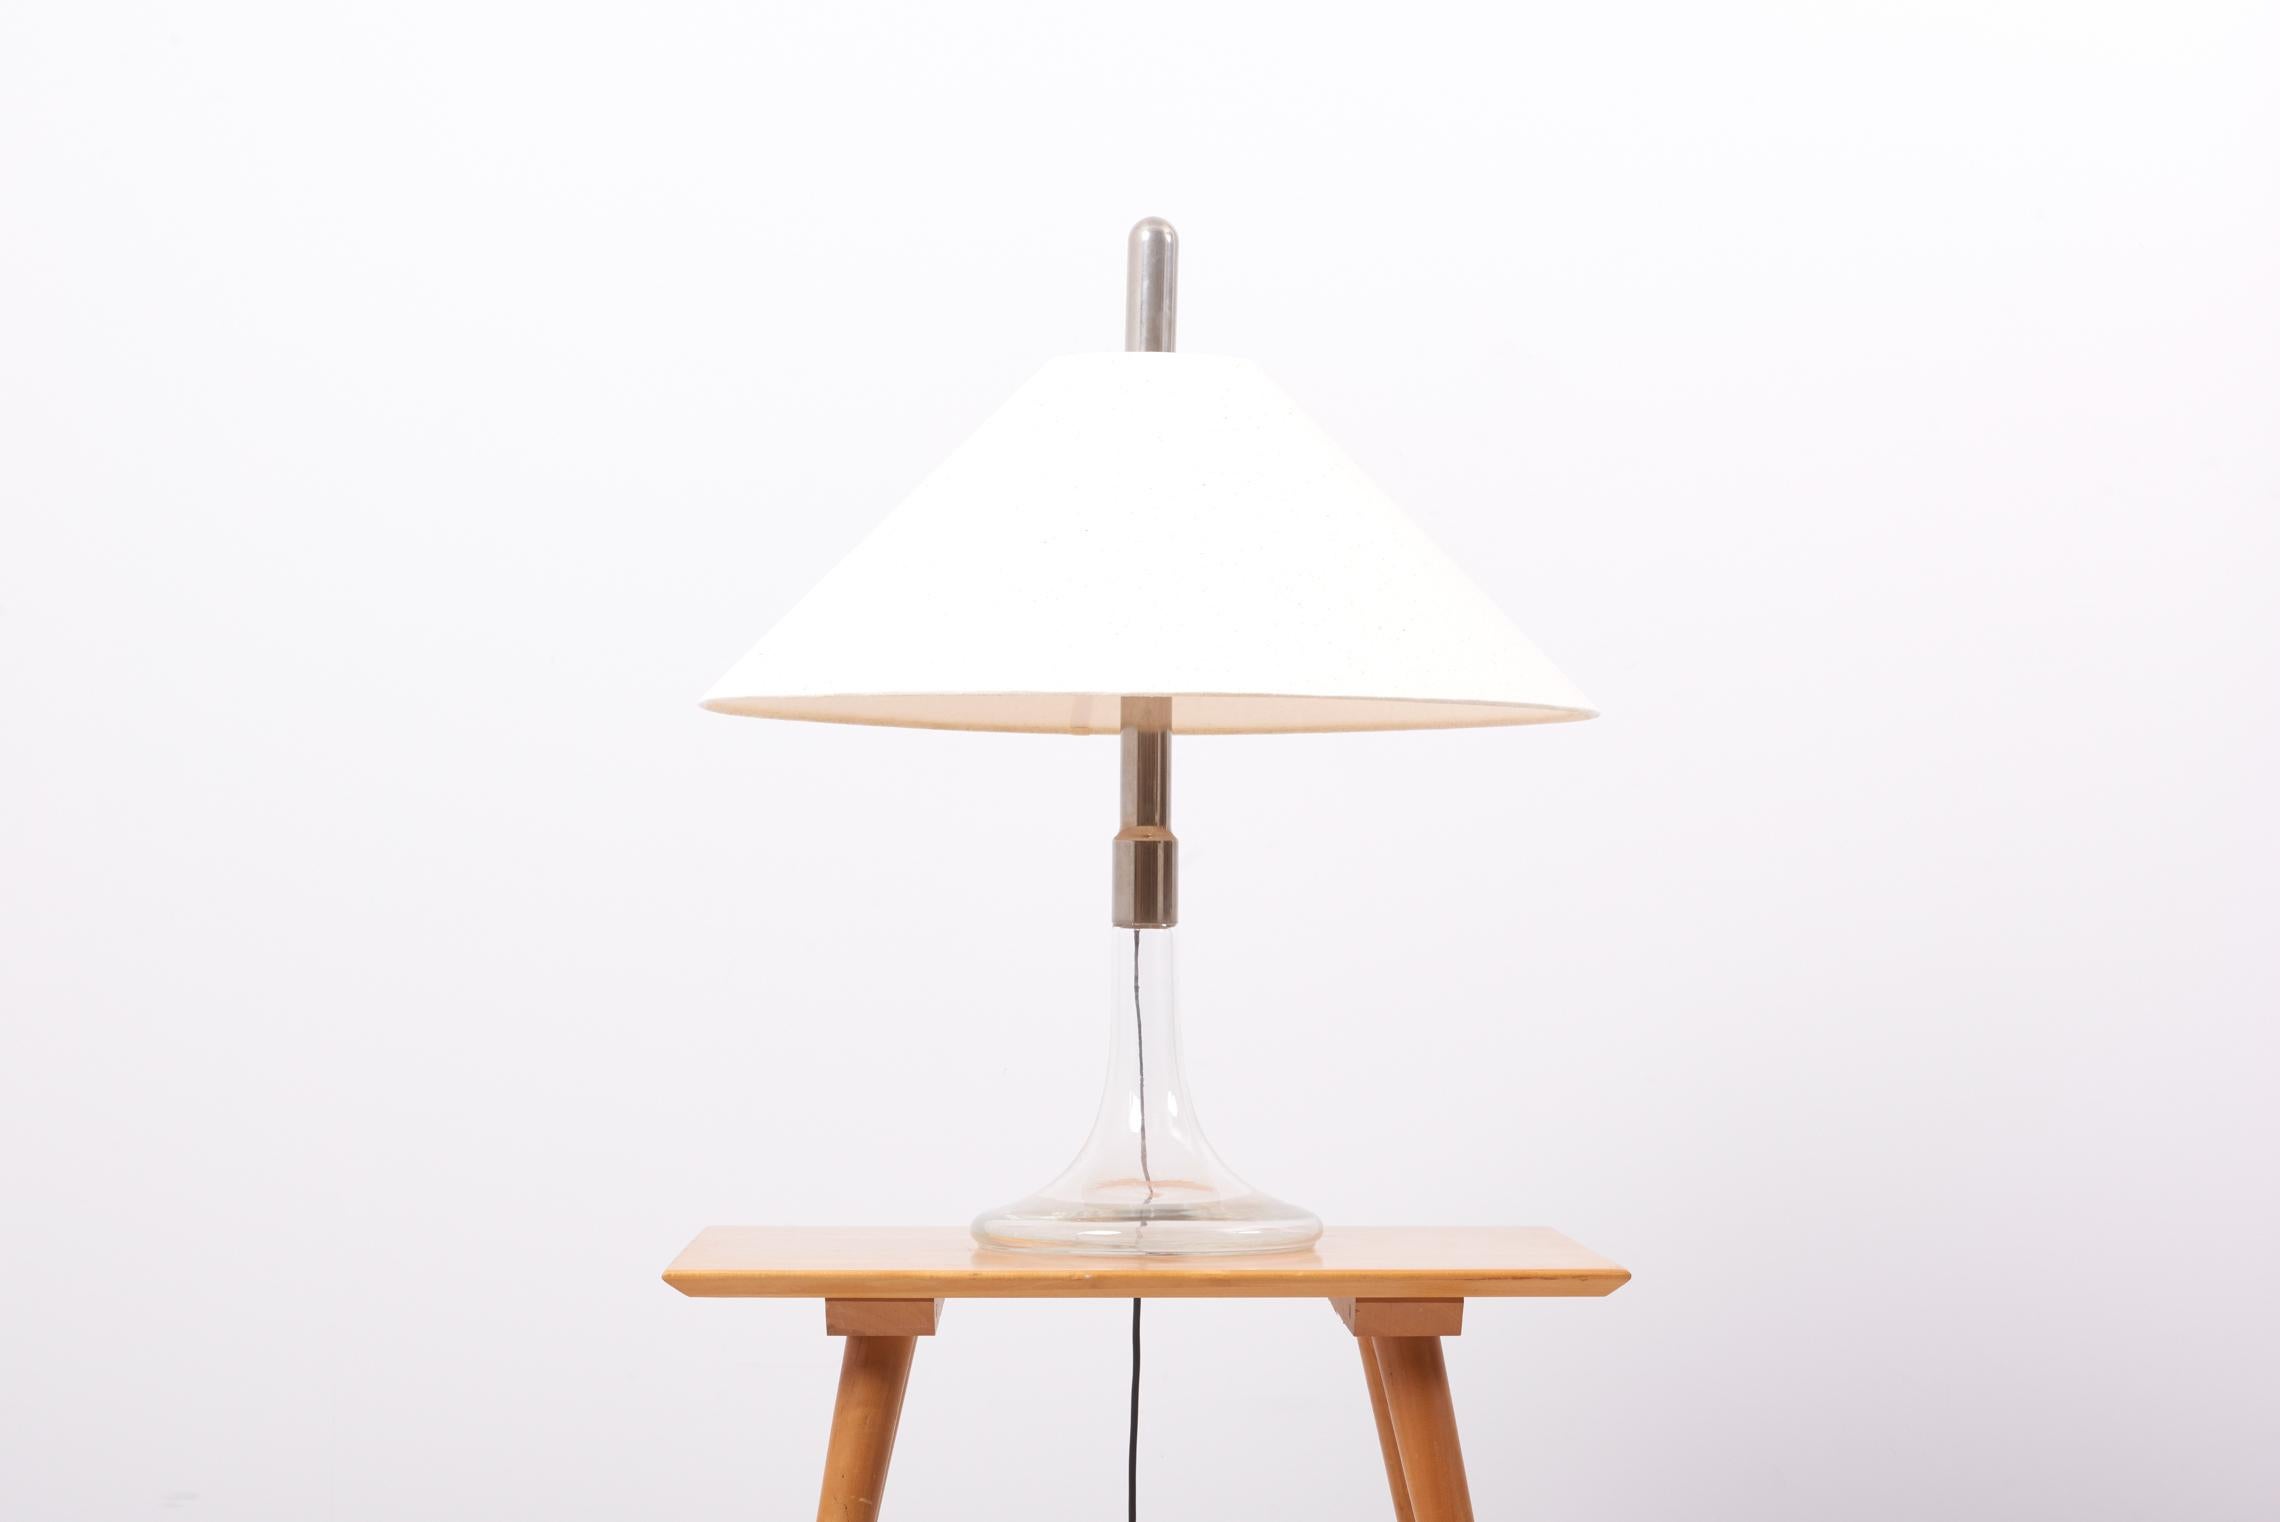 1960s table lamp, model ML3, designed and produced by Ingo Maurer in Germany.
Base made of glass and chrome. Including new lamp shade in beige natural silk.

2 x E27 sockets.

Please note: Lamp should be fitted professionally in accordance to